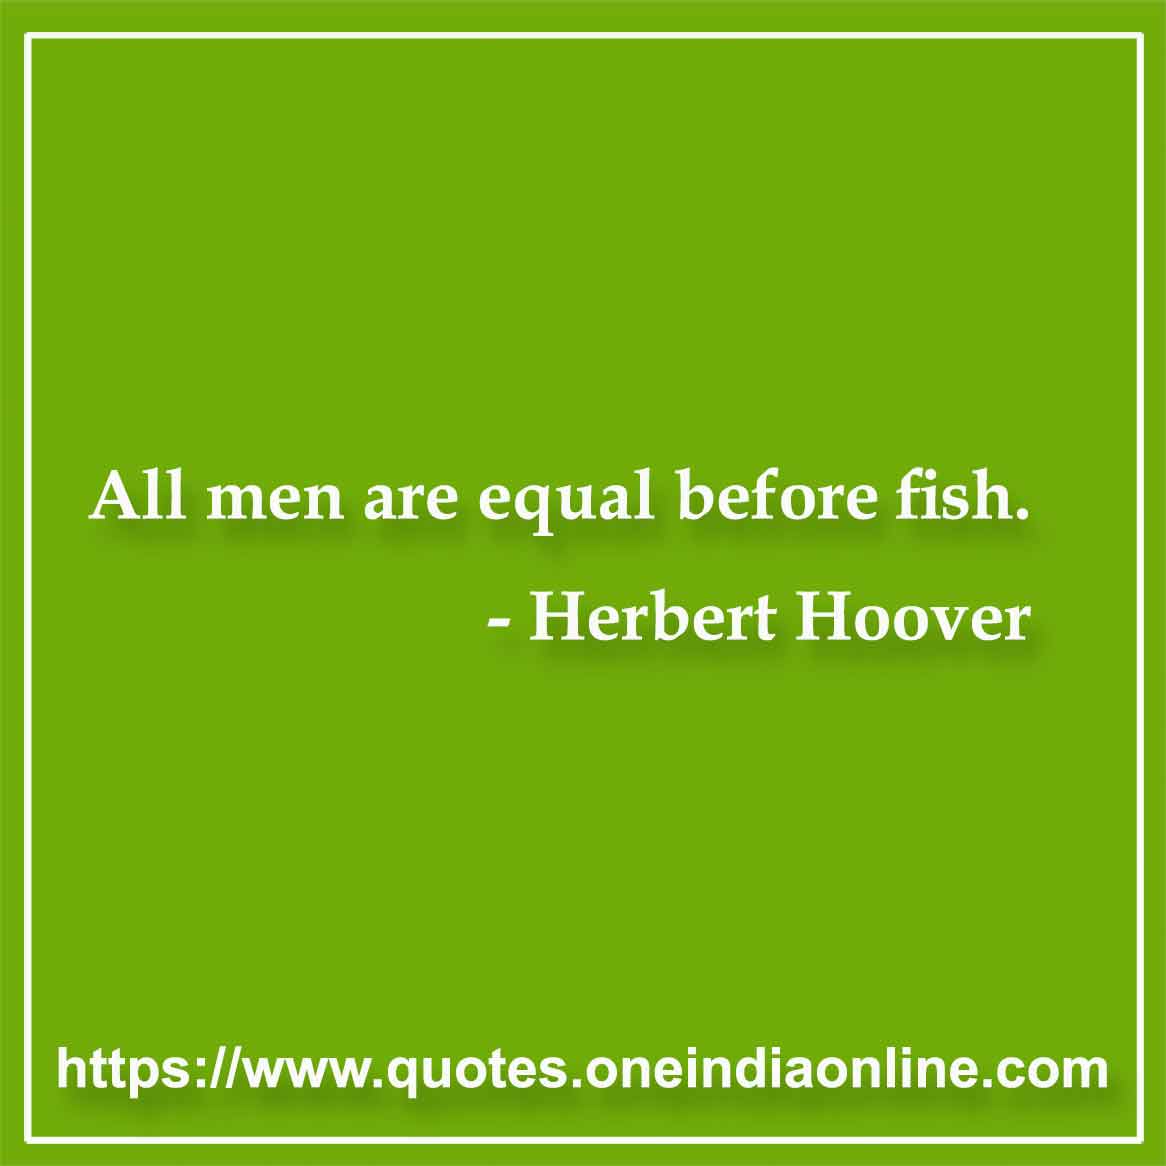 All men are equal before fish.

- Herbert Hoover